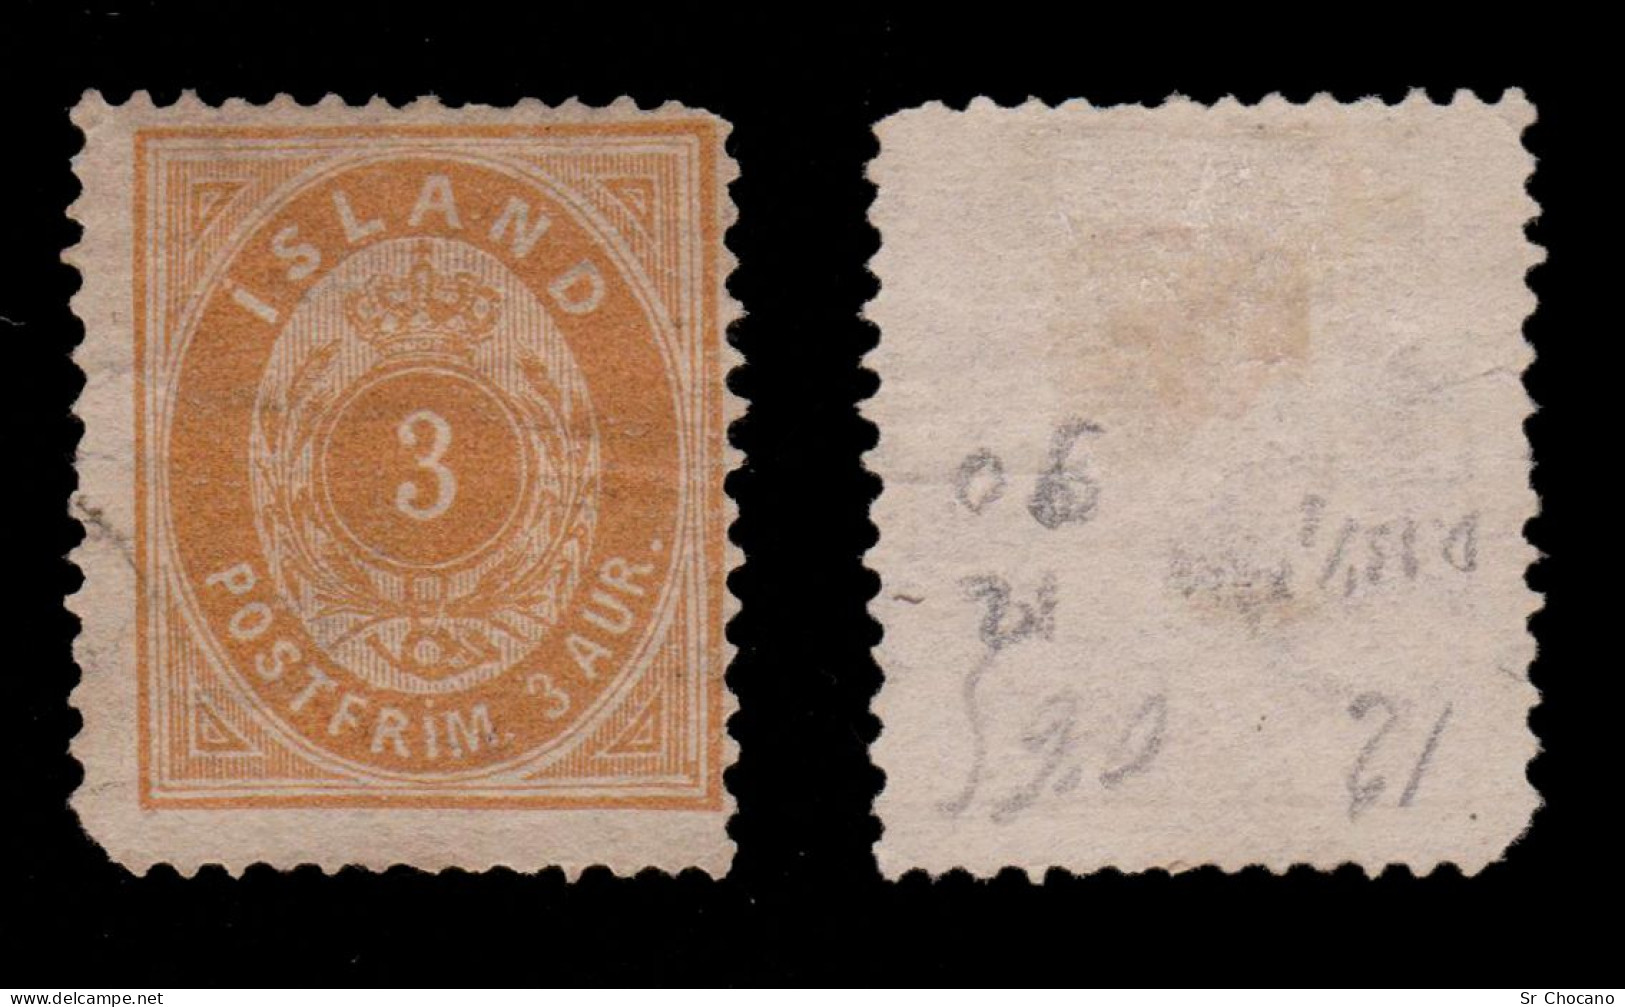 ICELAND STAMP.1882-98.3a .Scott.15.FINE USED.Perf.14x13 ½ - Used Stamps